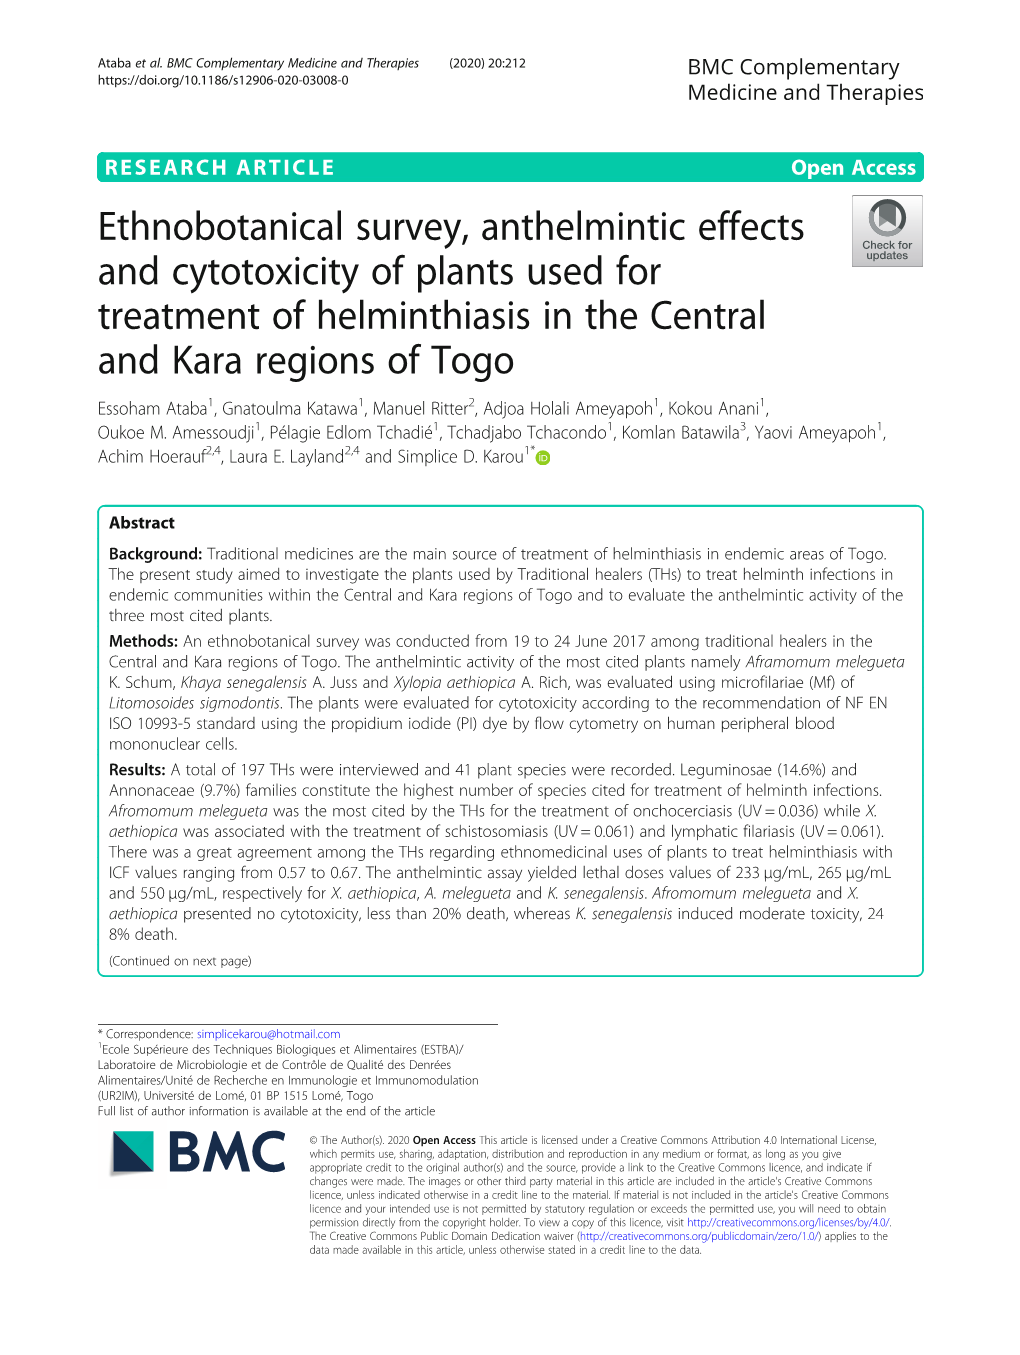 Ethnobotanical Survey, Anthelmintic Effects and Cytotoxicity of Plants